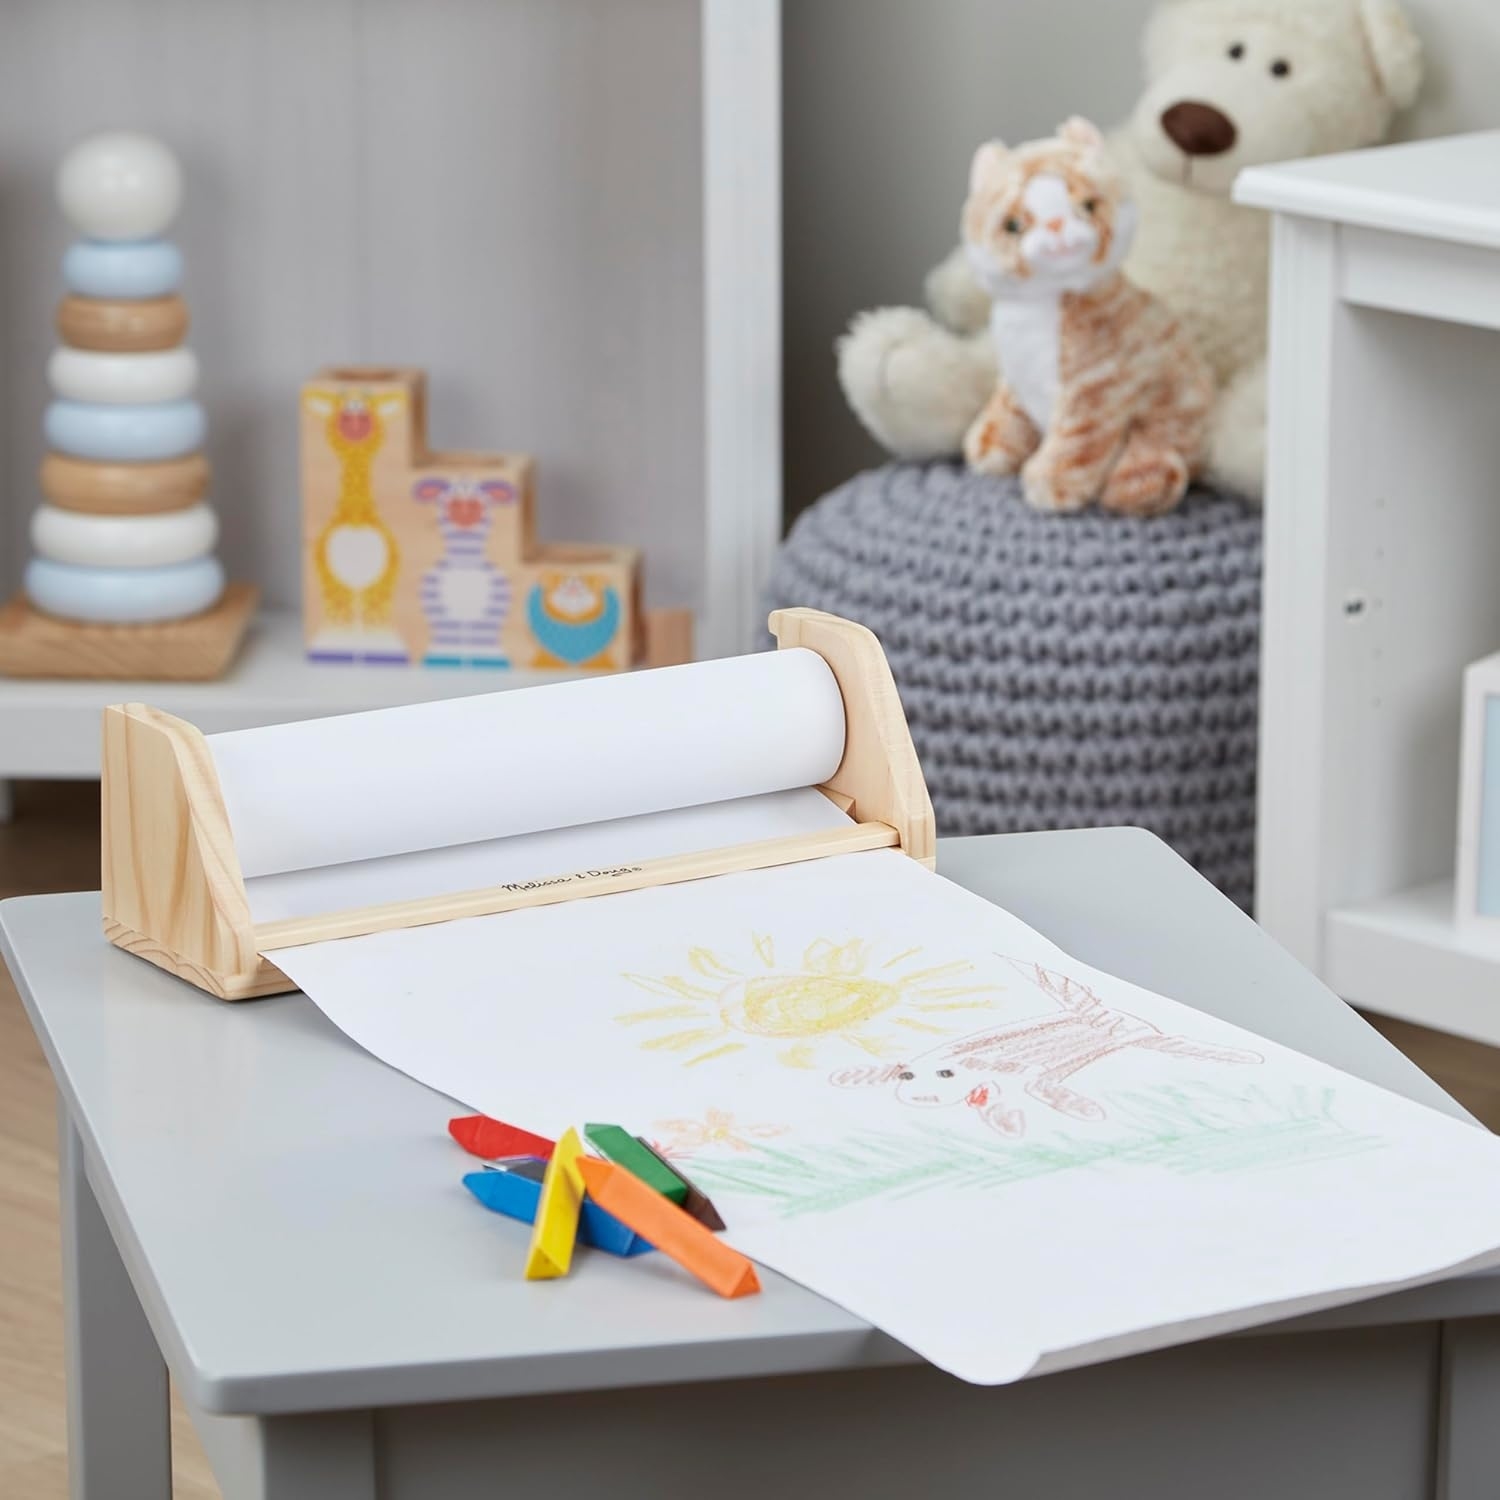 Children's drawing table with paper roll, crayons, and toys in the background